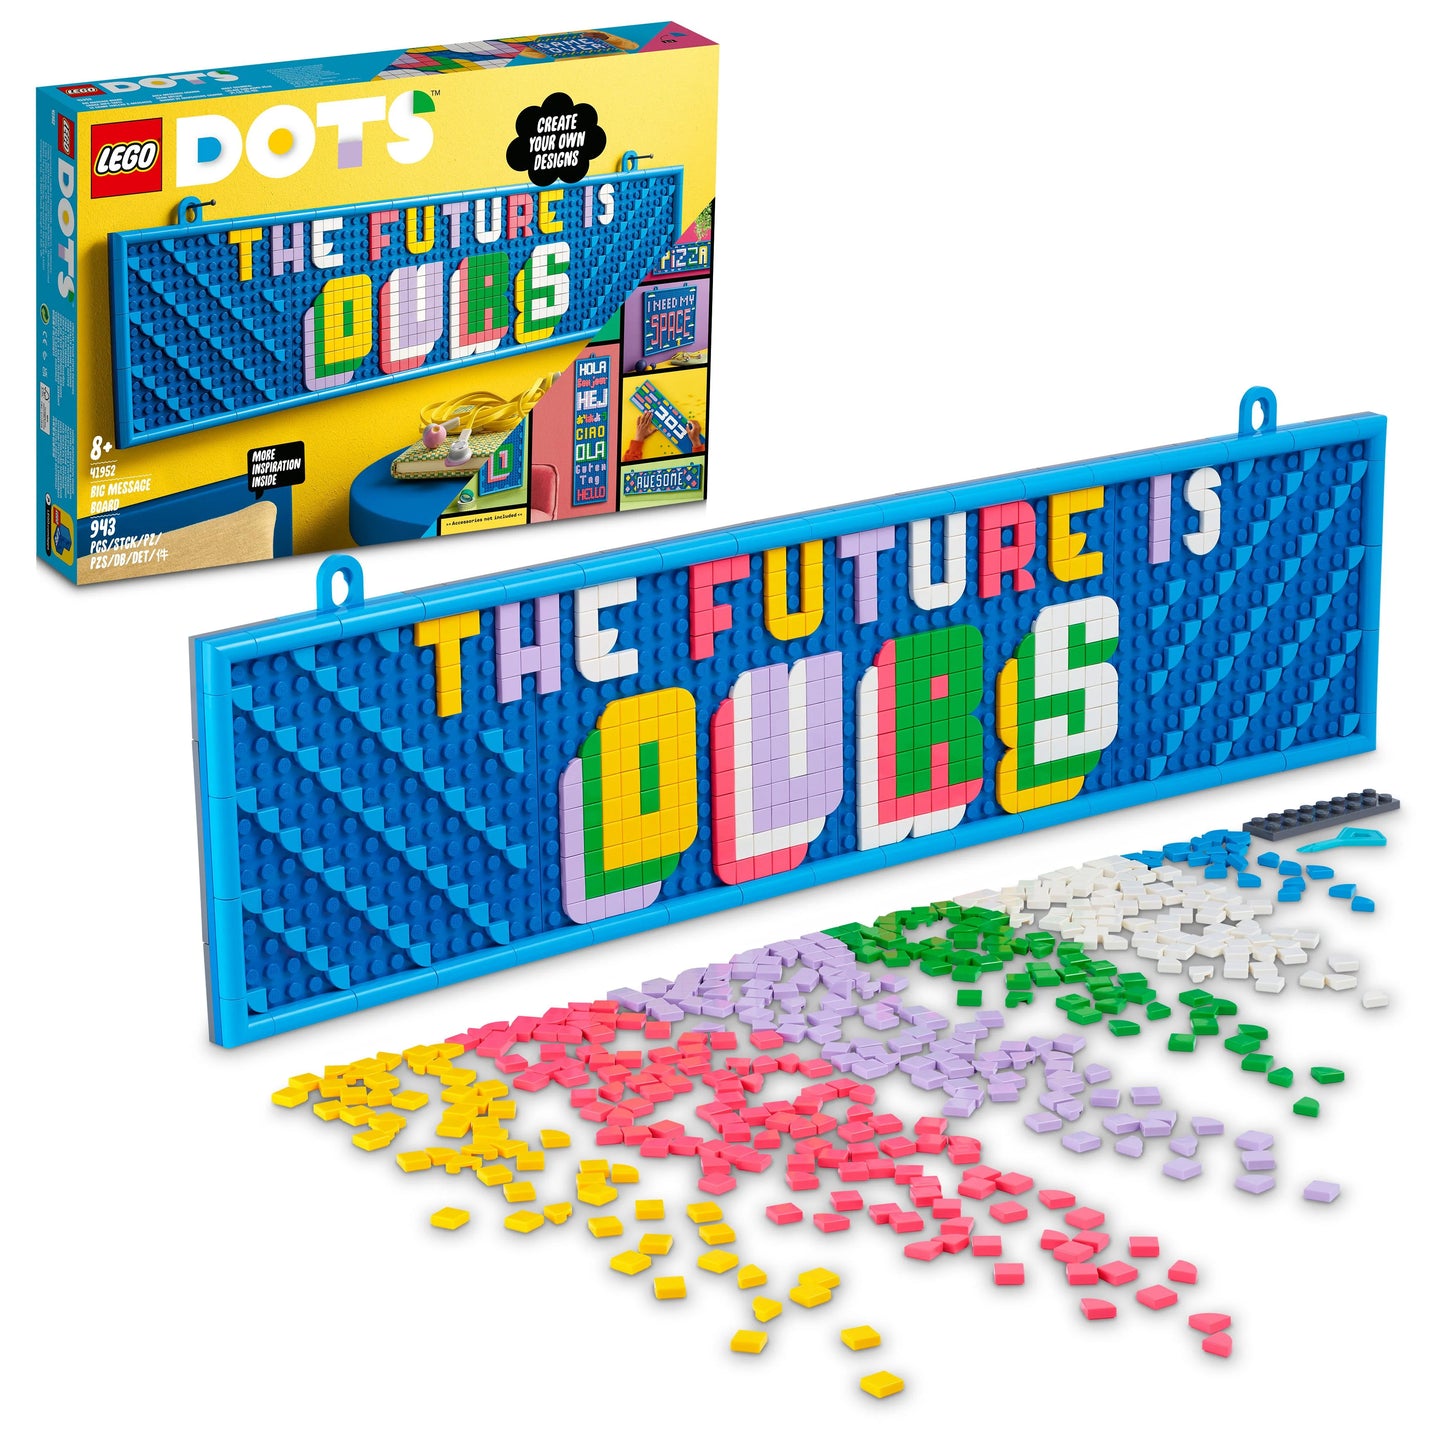 Large notice board - LEGO Dots